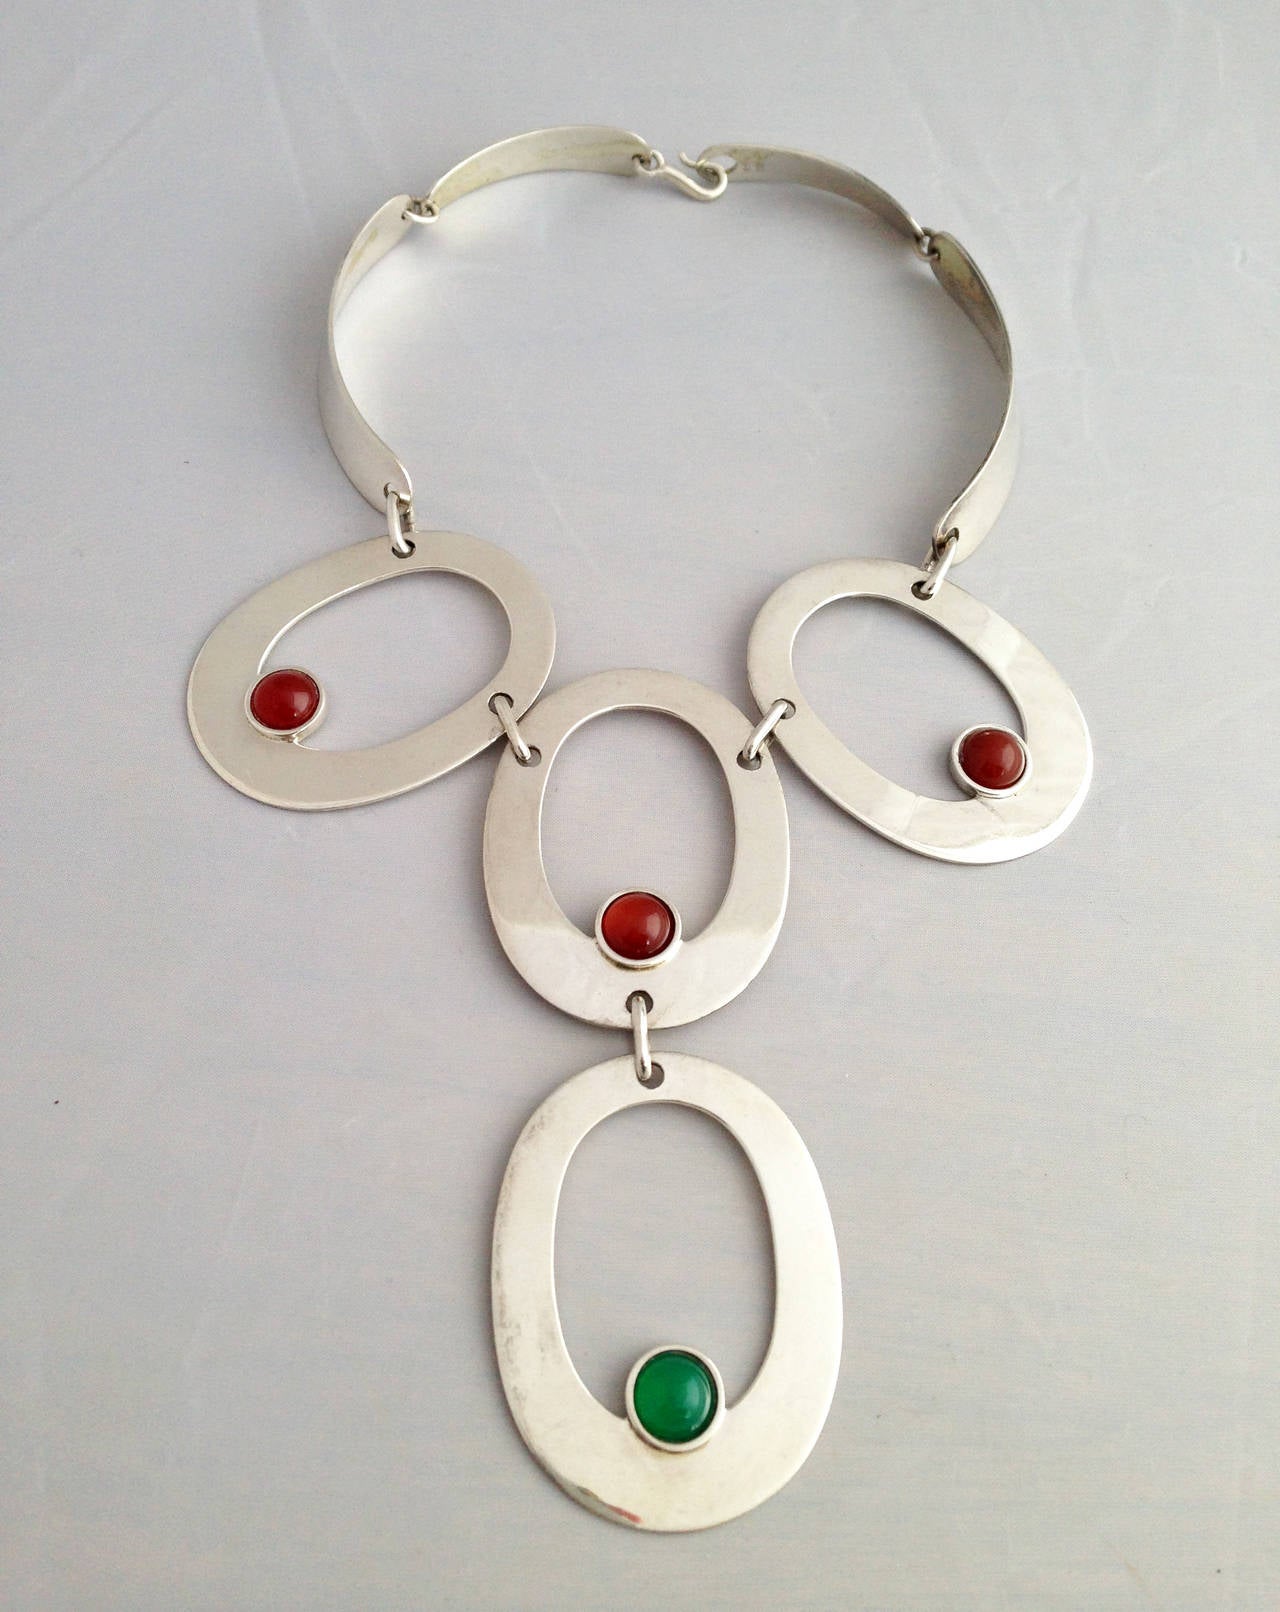 1970's sterling silver  necklace with cabochons of chrysoprase and carnelian created by José Maria Puig Doria of Barcelona , Spain.  Necklace has a wearable neck length of 16